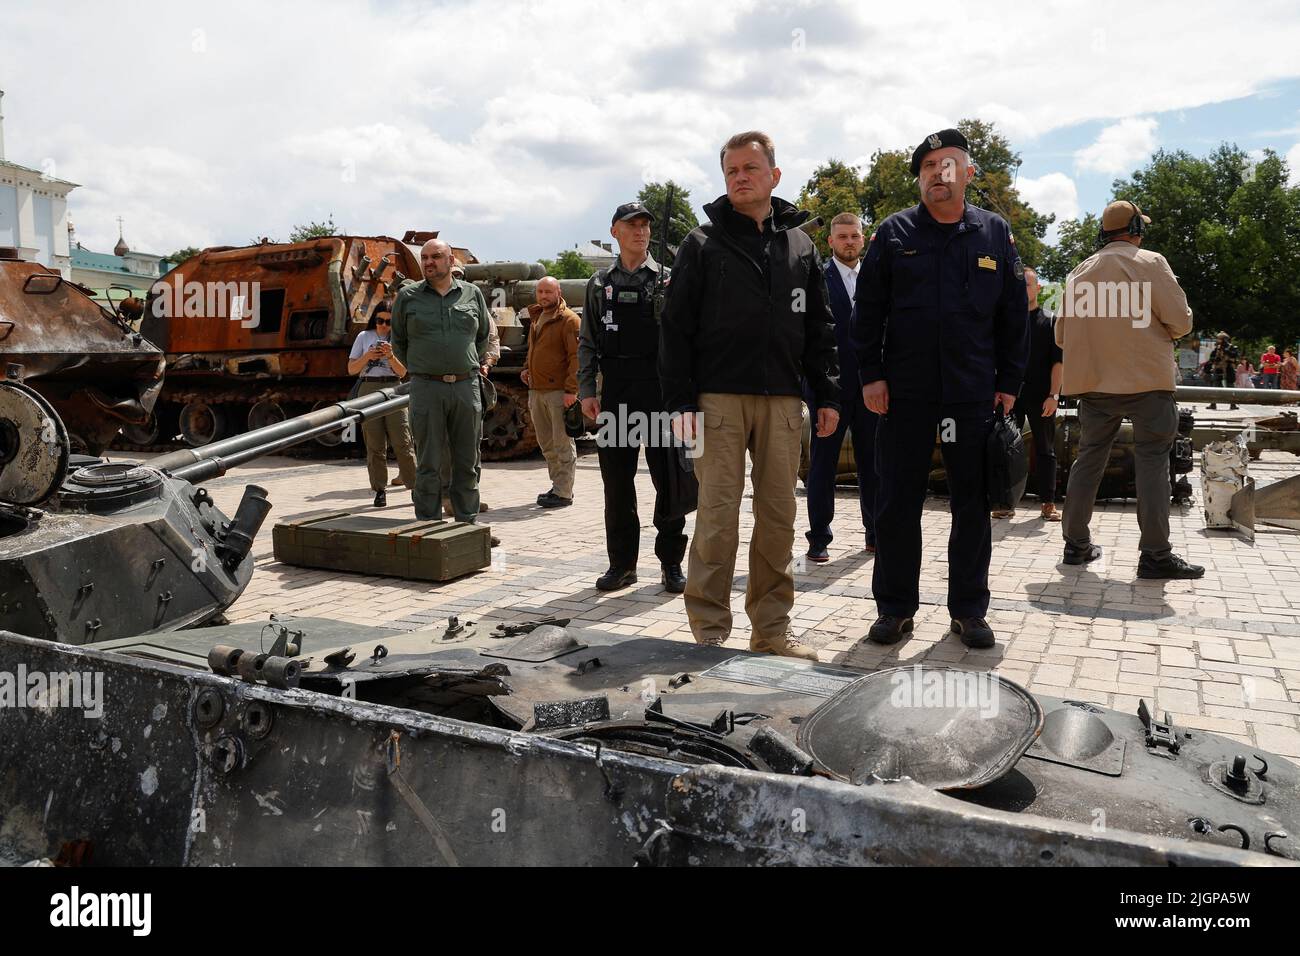 Polish Defence Minister Mariusz Blaszczak visits an exhibition of destroyed Russian military vehicles and weapons, as Russia's attack on Ukraine continues, at Mykhailivska Square in Kyiv, Ukraine July 12, 2022.  REUTERS/Valentyn Ogirenko Stock Photo